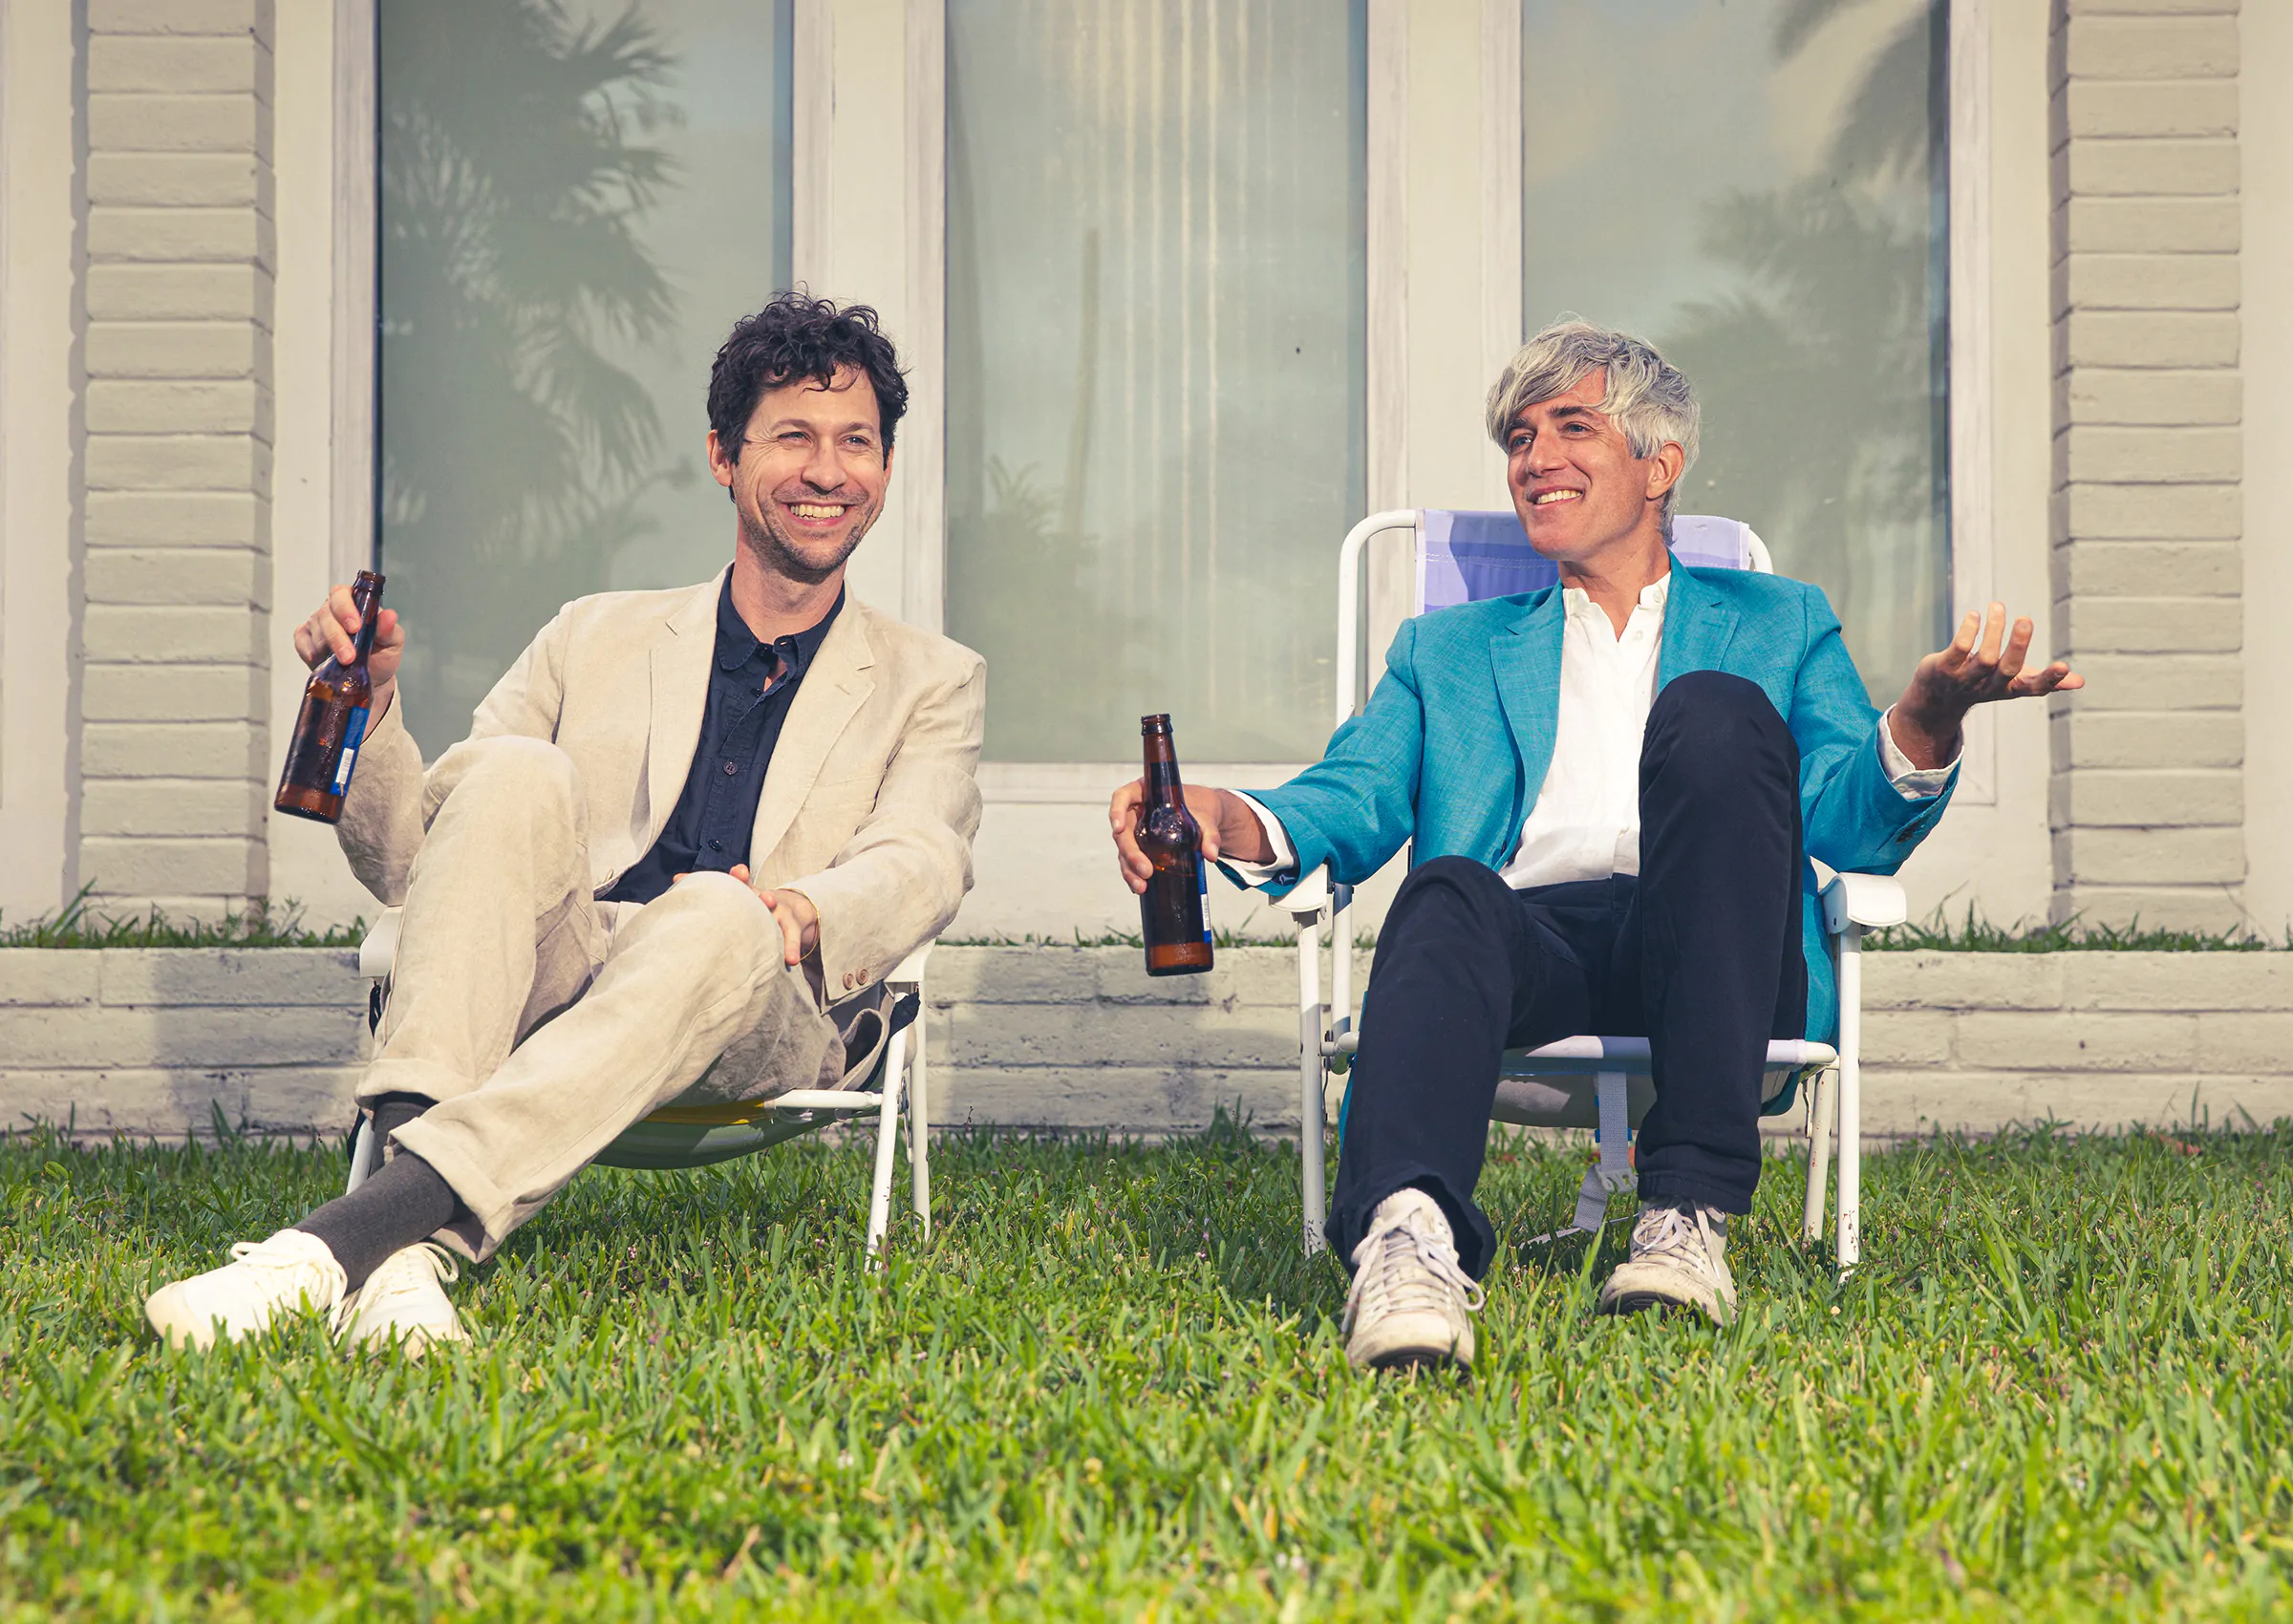 WE ARE SCIENTISTS return with ‘Huffy’ their first album in 3 years – Listen to first single ‘Contact High’